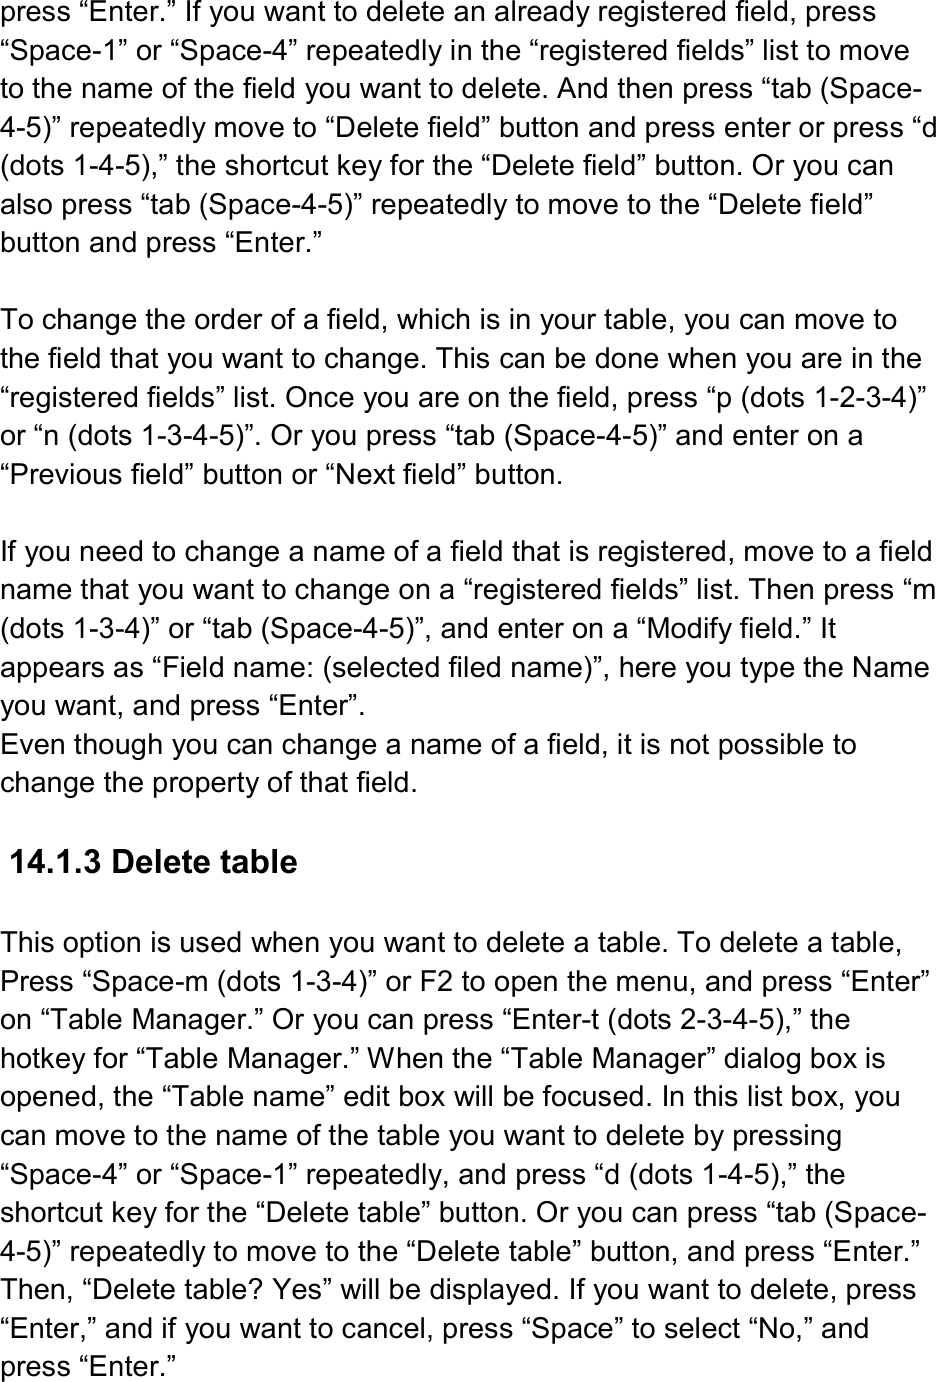  press “Enter.” If you want to delete an already registered field, press “Space-1” or “Space-4” repeatedly in the “registered fields” list to move to the name of the field you want to delete. And then press “tab (Space-4-5)” repeatedly move to “Delete field” button and press enter or press “d (dots 1-4-5),” the shortcut key for the “Delete field” button. Or you can also press “tab (Space-4-5)” repeatedly to move to the “Delete field” button and press “Enter.”  To change the order of a field, which is in your table, you can move to the field that you want to change. This can be done when you are in the “registered fields” list. Once you are on the field, press “p (dots 1-2-3-4)” or “n (dots 1-3-4-5)”. Or you press “tab (Space-4-5)” and enter on a “Previous field” button or “Next field” button.  If you need to change a name of a field that is registered, move to a field name that you want to change on a “registered fields” list. Then press “m (dots 1-3-4)” or “tab (Space-4-5)”, and enter on a “Modify field.” It appears as “Field name: (selected filed name)”, here you type the Name you want, and press “Enter”. Even though you can change a name of a field, it is not possible to change the property of that field.  14.1.3 Delete table  This option is used when you want to delete a table. To delete a table, Press “Space-m (dots 1-3-4)” or F2 to open the menu, and press “Enter” on “Table Manager.” Or you can press “Enter-t (dots 2-3-4-5),” the hotkey for “Table Manager.” When the “Table Manager” dialog box is opened, the “Table name” edit box will be focused. In this list box, you can move to the name of the table you want to delete by pressing “Space-4” or “Space-1” repeatedly, and press “d (dots 1-4-5),” the shortcut key for the “Delete table” button. Or you can press “tab (Space-4-5)” repeatedly to move to the “Delete table” button, and press “Enter.” Then, “Delete table? Yes” will be displayed. If you want to delete, press “Enter,” and if you want to cancel, press “Space” to select “No,” and press “Enter.” 